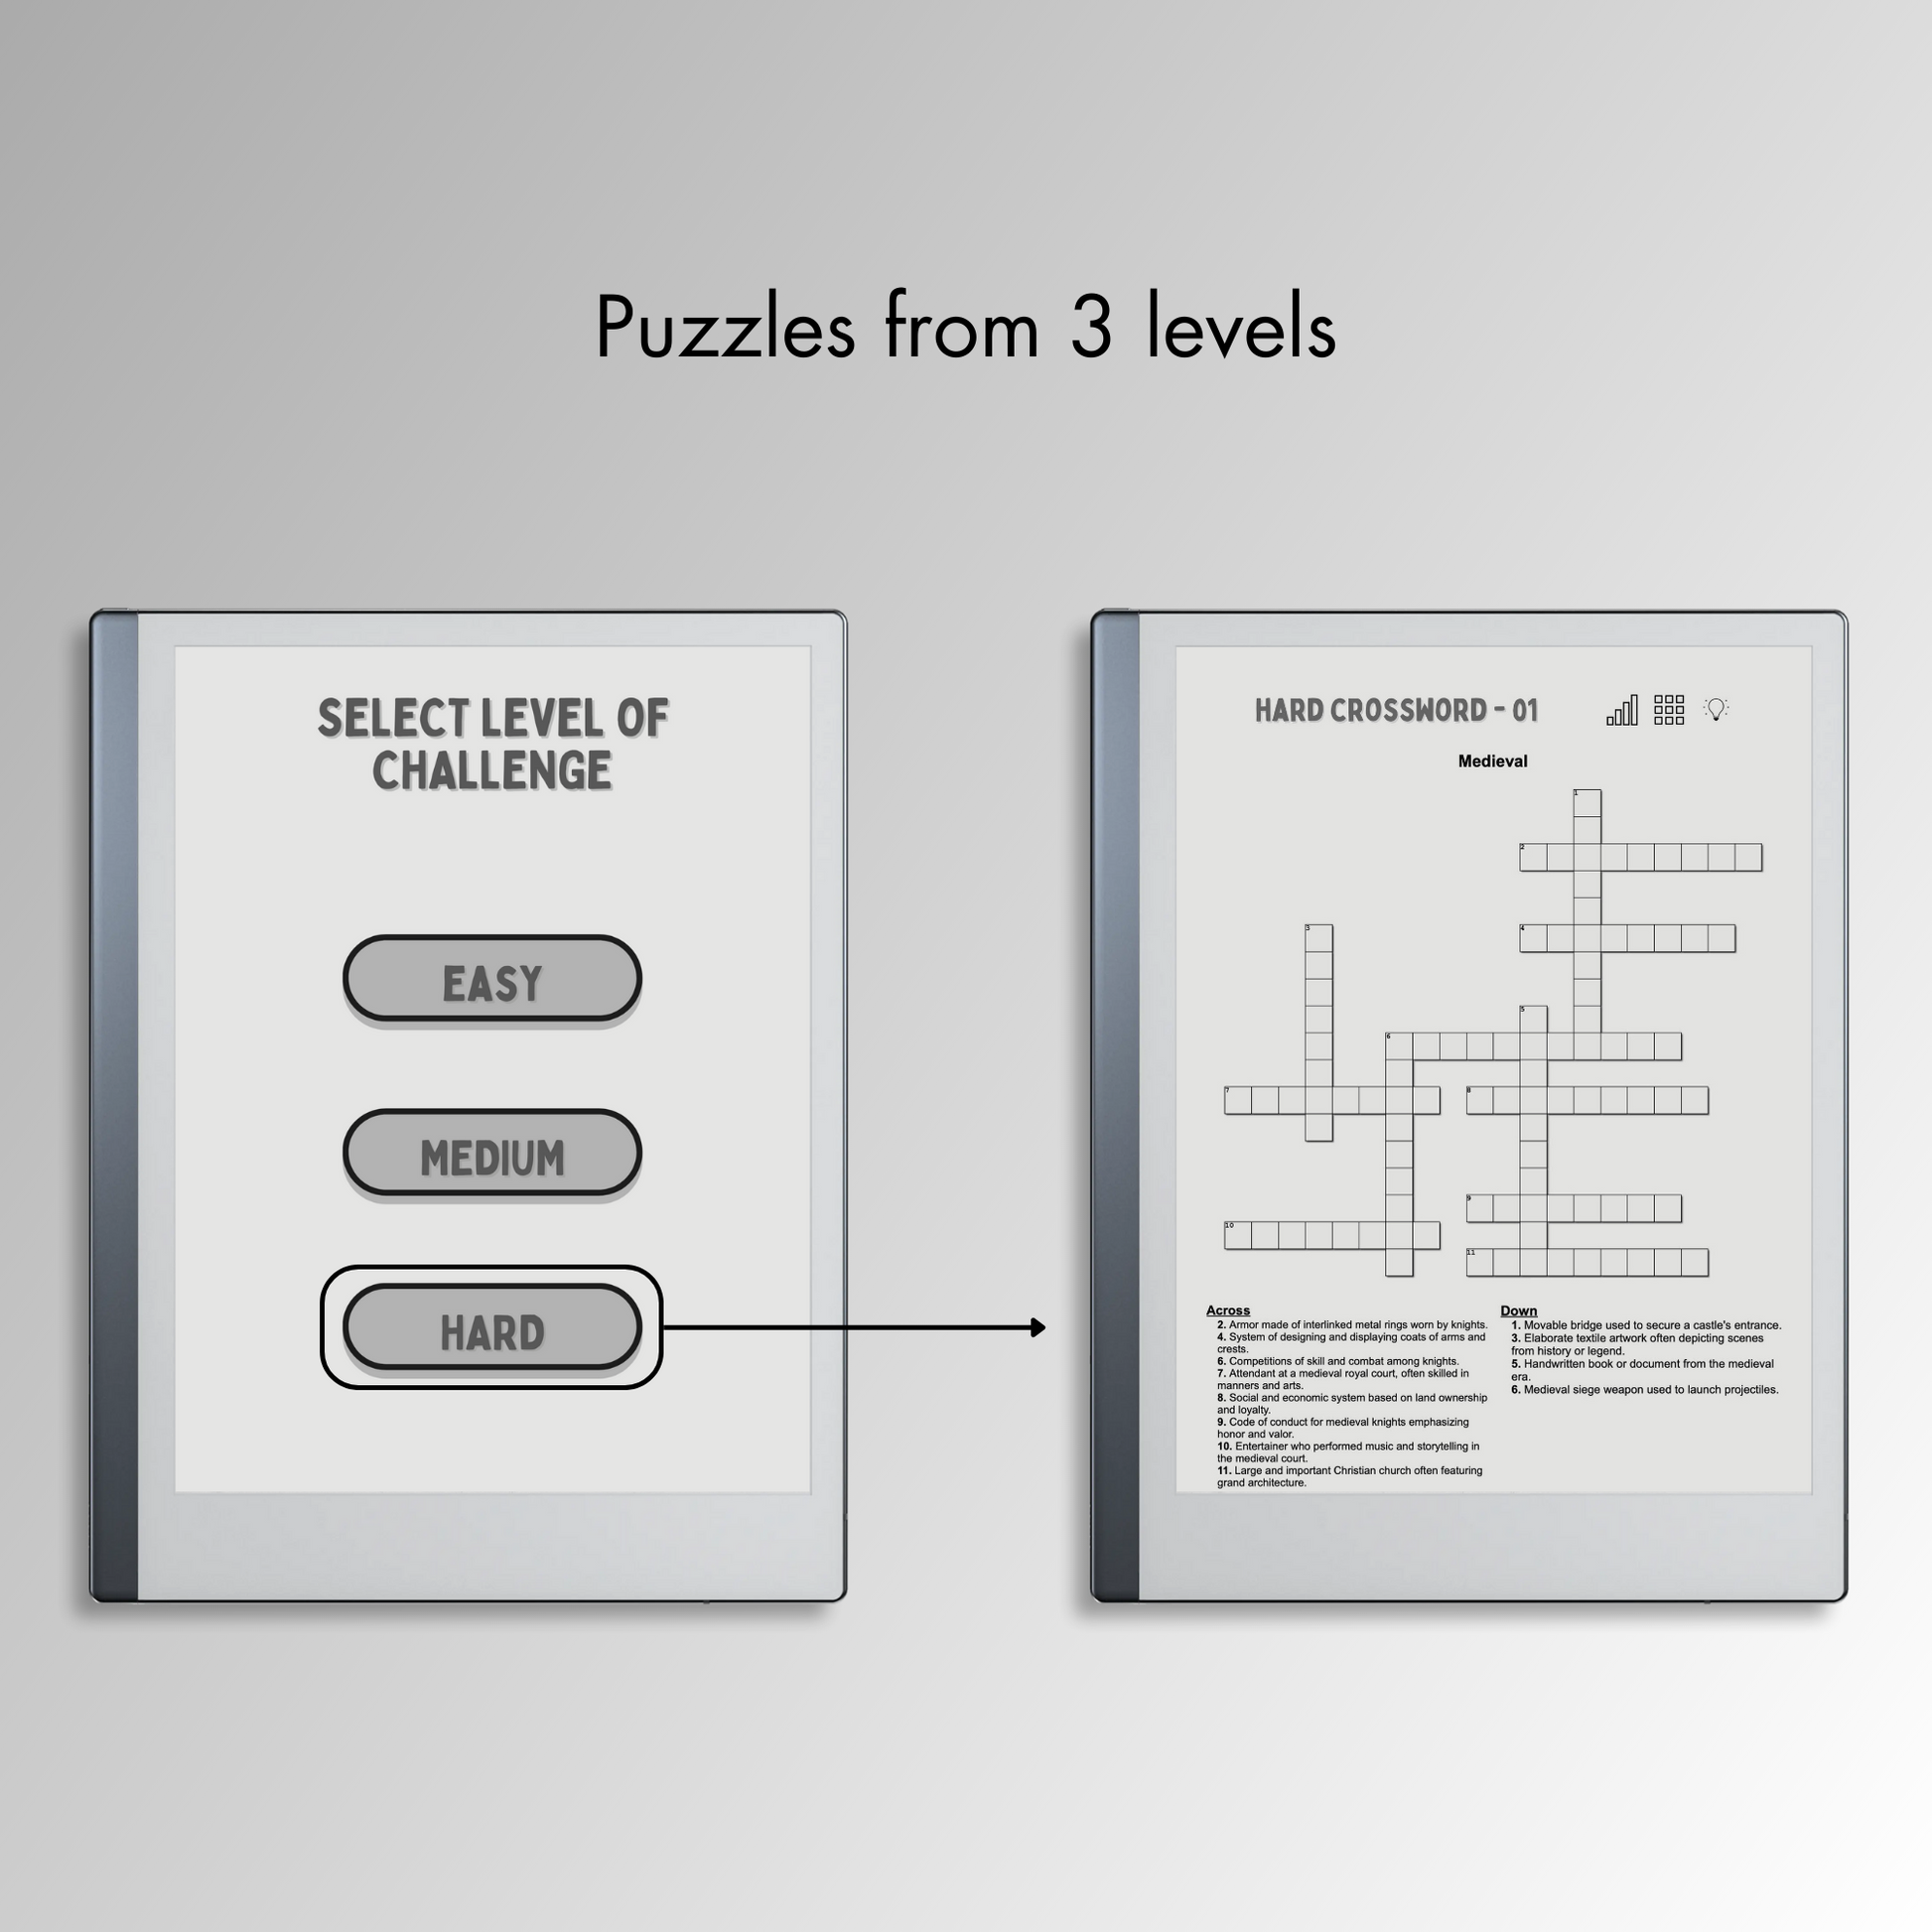 Remarkable 2 Crossword Puzzles in 3 different levels.